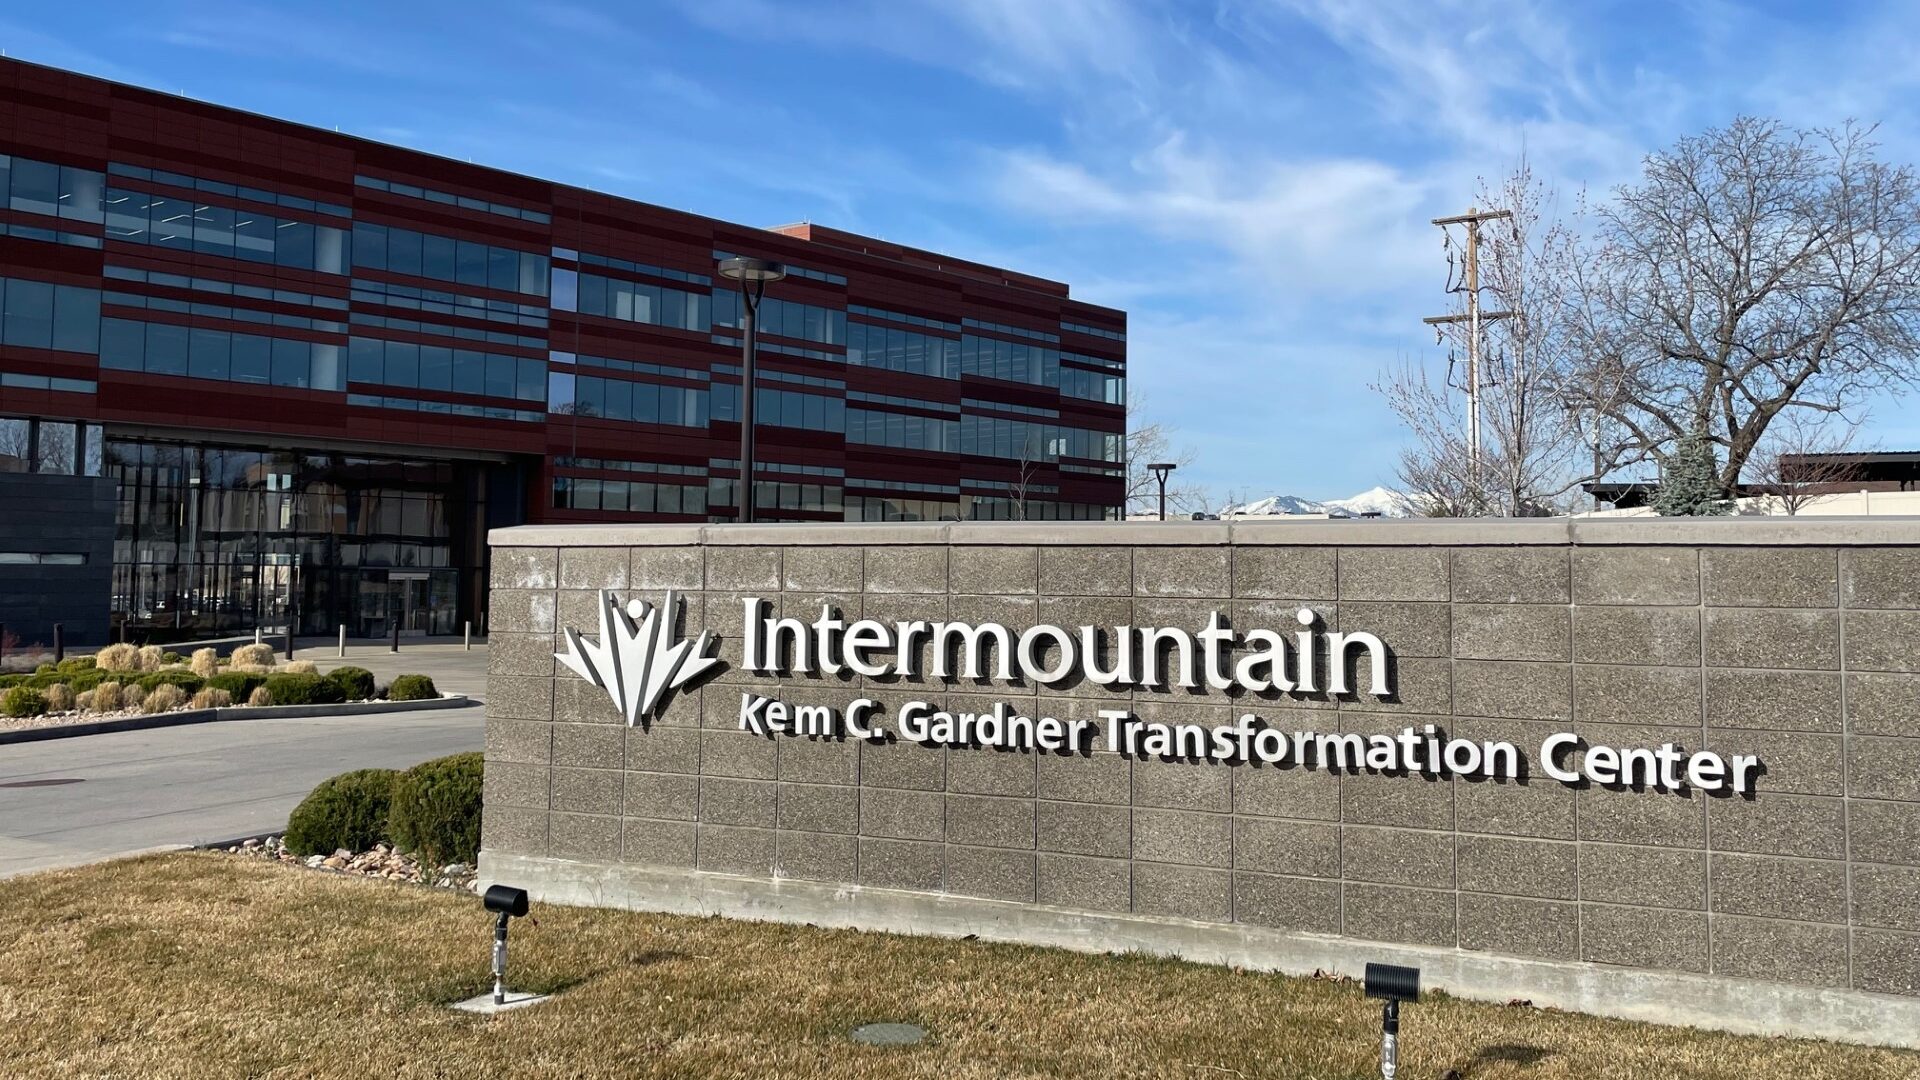 A sign for Intermountain Health's Kem. C Gardner Transformation Center outside the building...